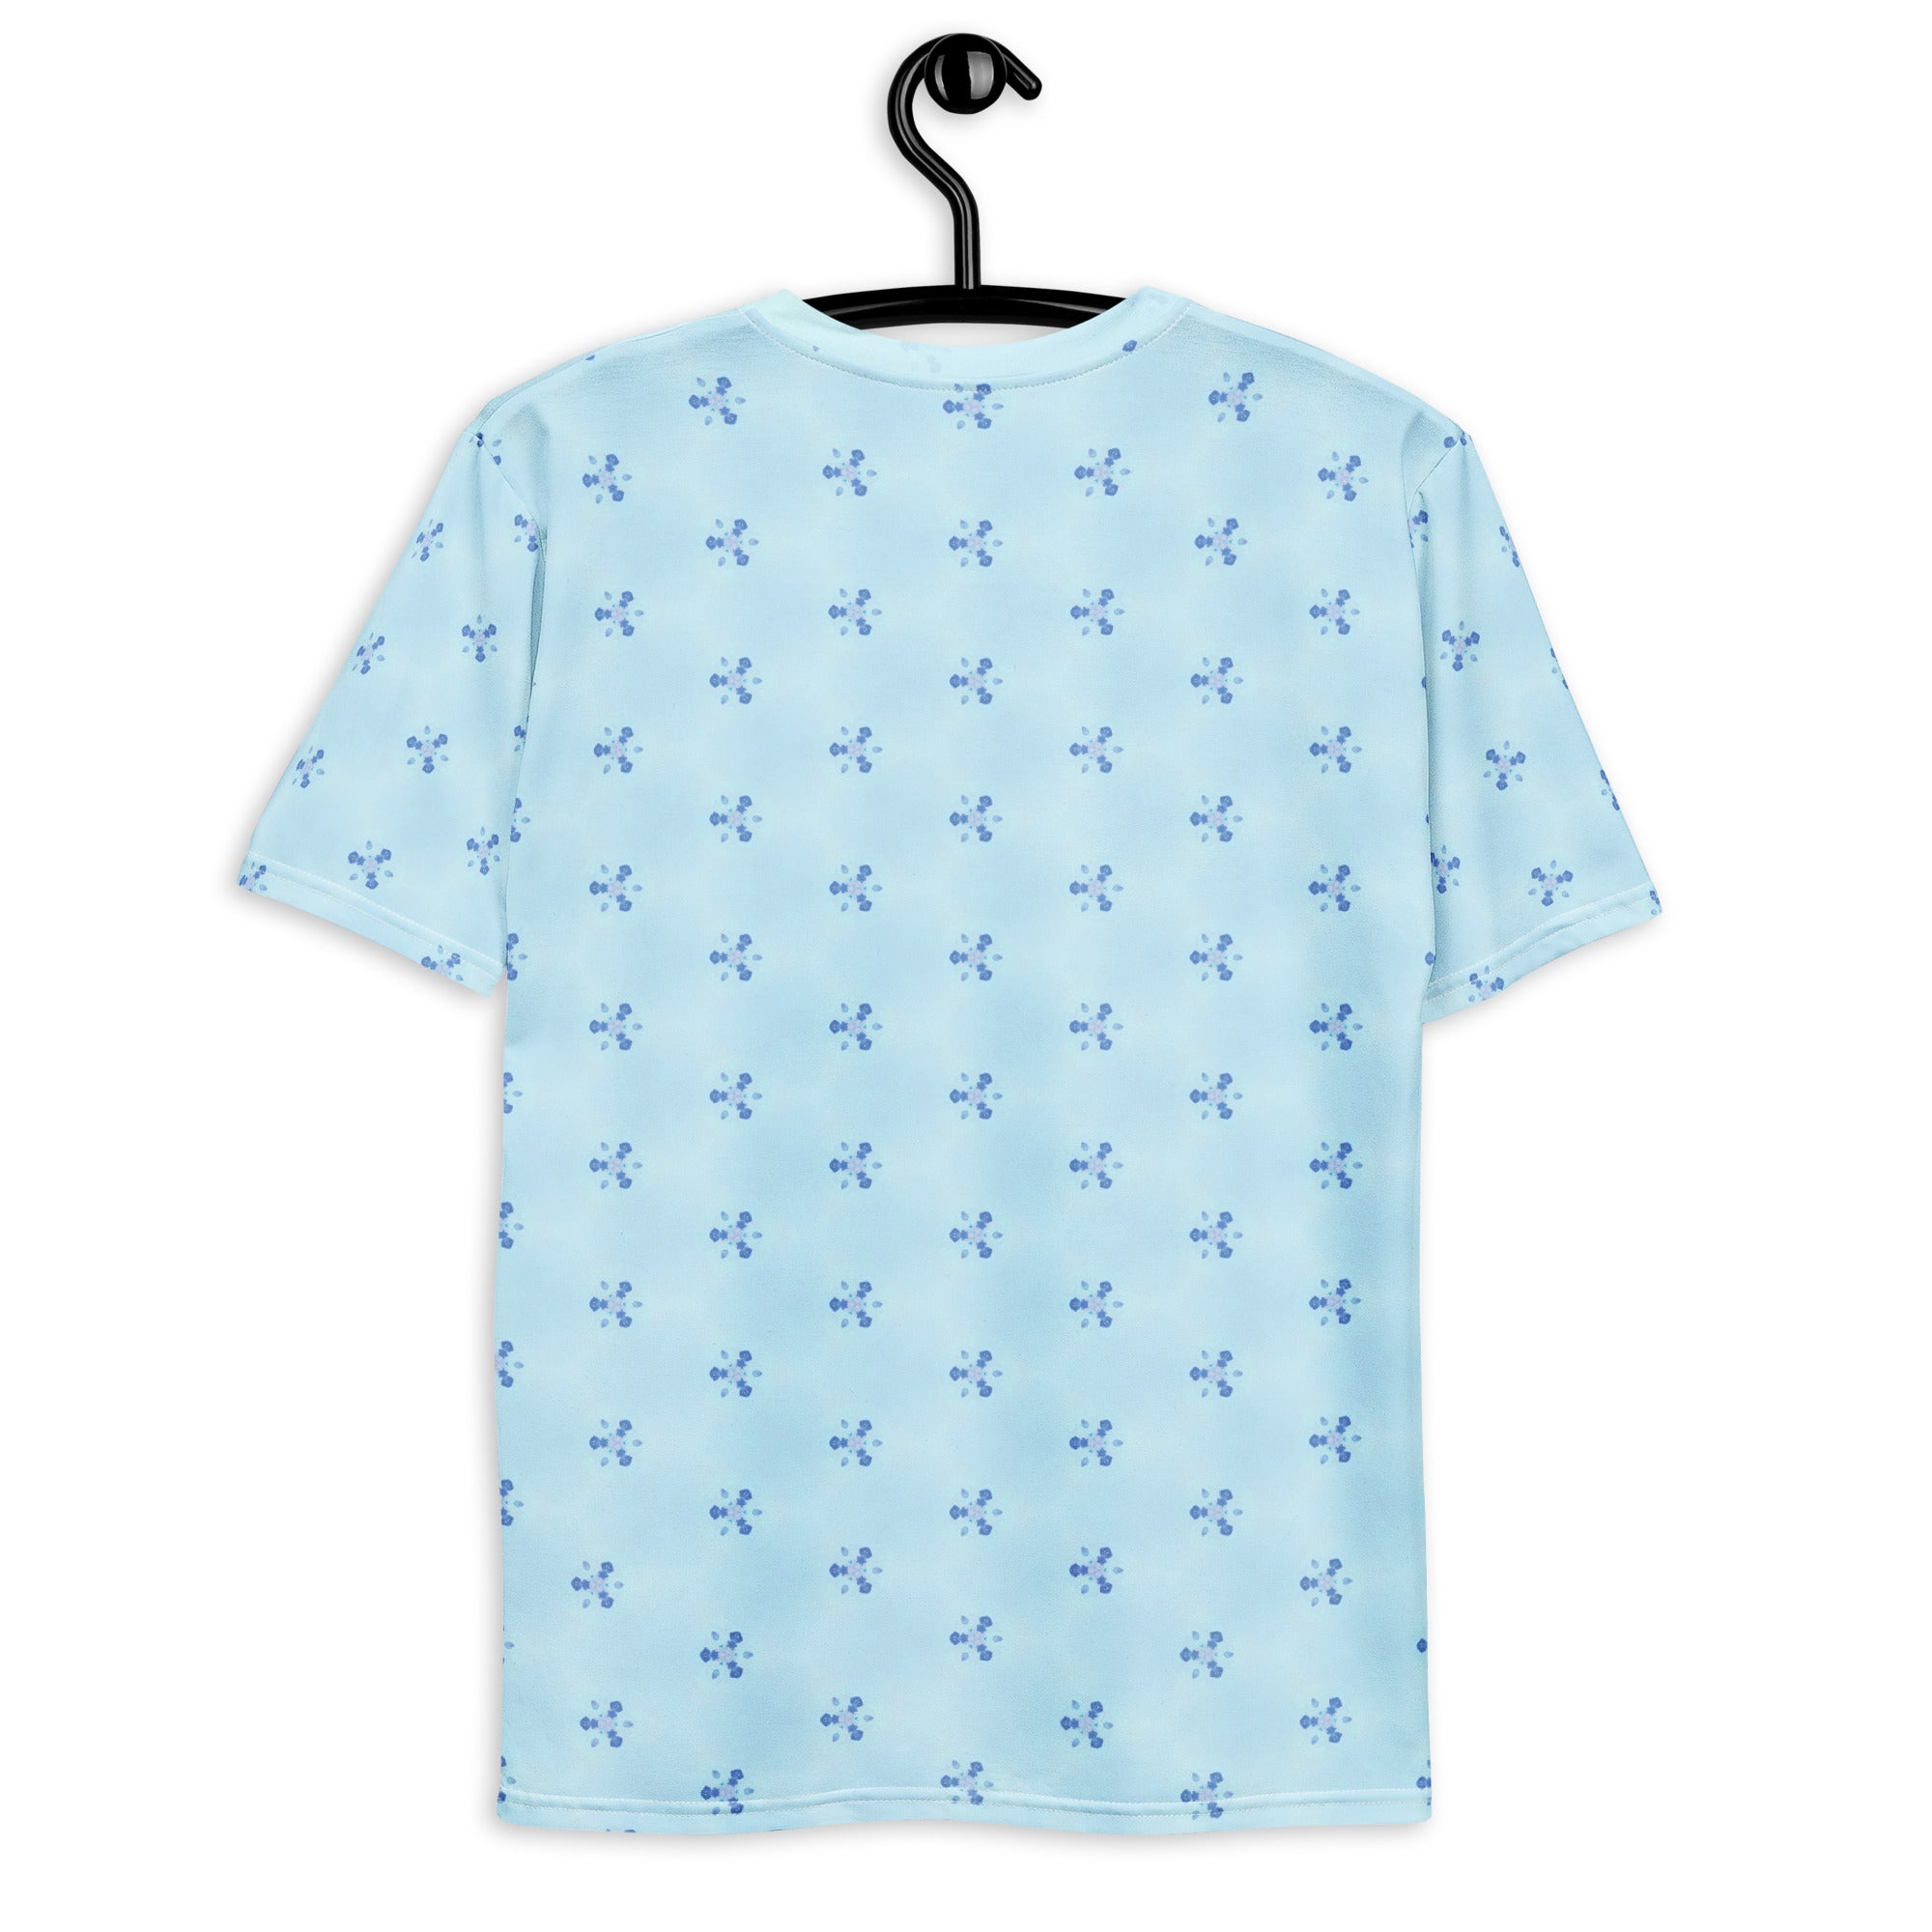 Flat lay of Origami Ocean Waves Men's Crew Neck T-Shirt with accessories.